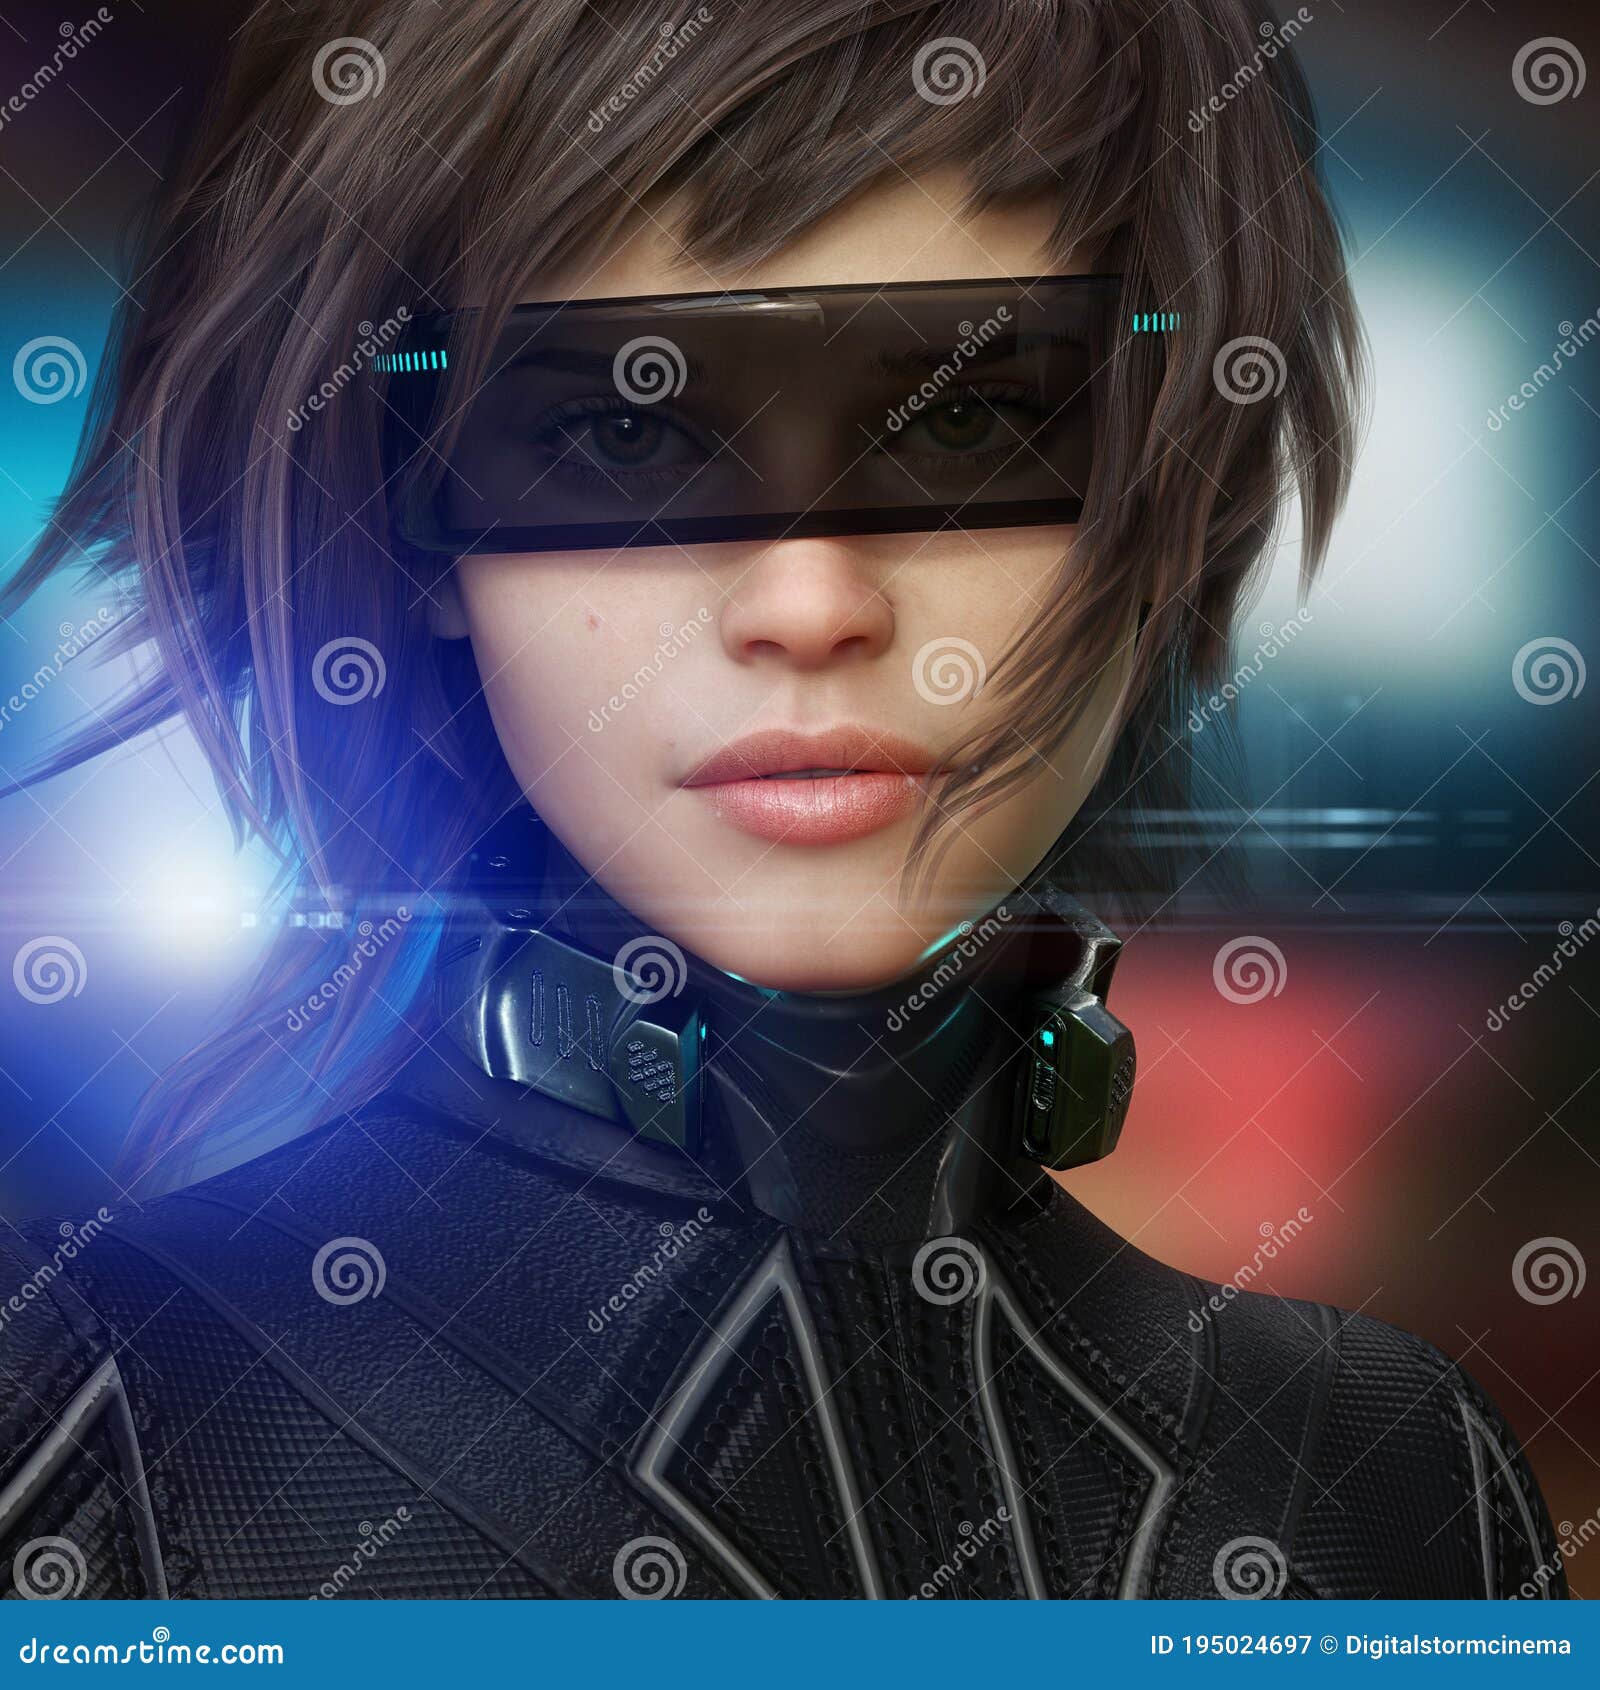 portrait of a futuristic sci fi female wearing a tactical jump suit and a science fiction visor